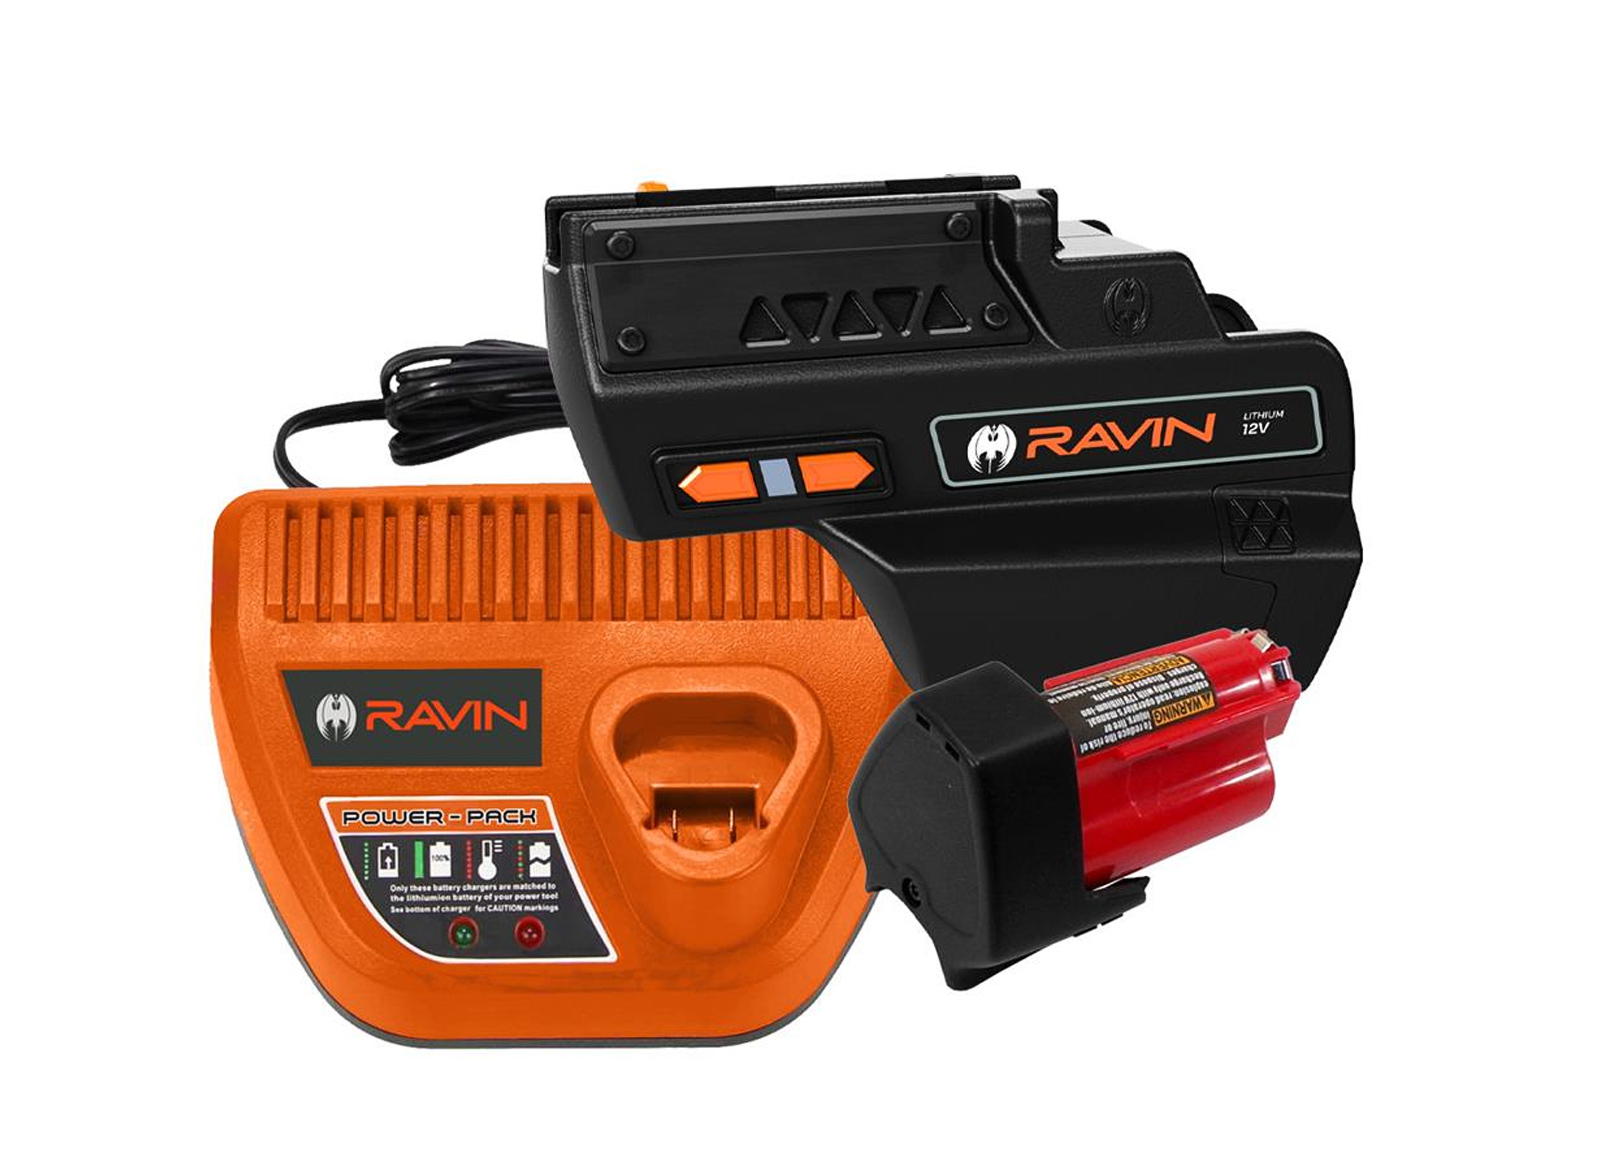 RAVIN R500 ELECTRIC DRIVE KIT SYSTEM CE CERTIFIED